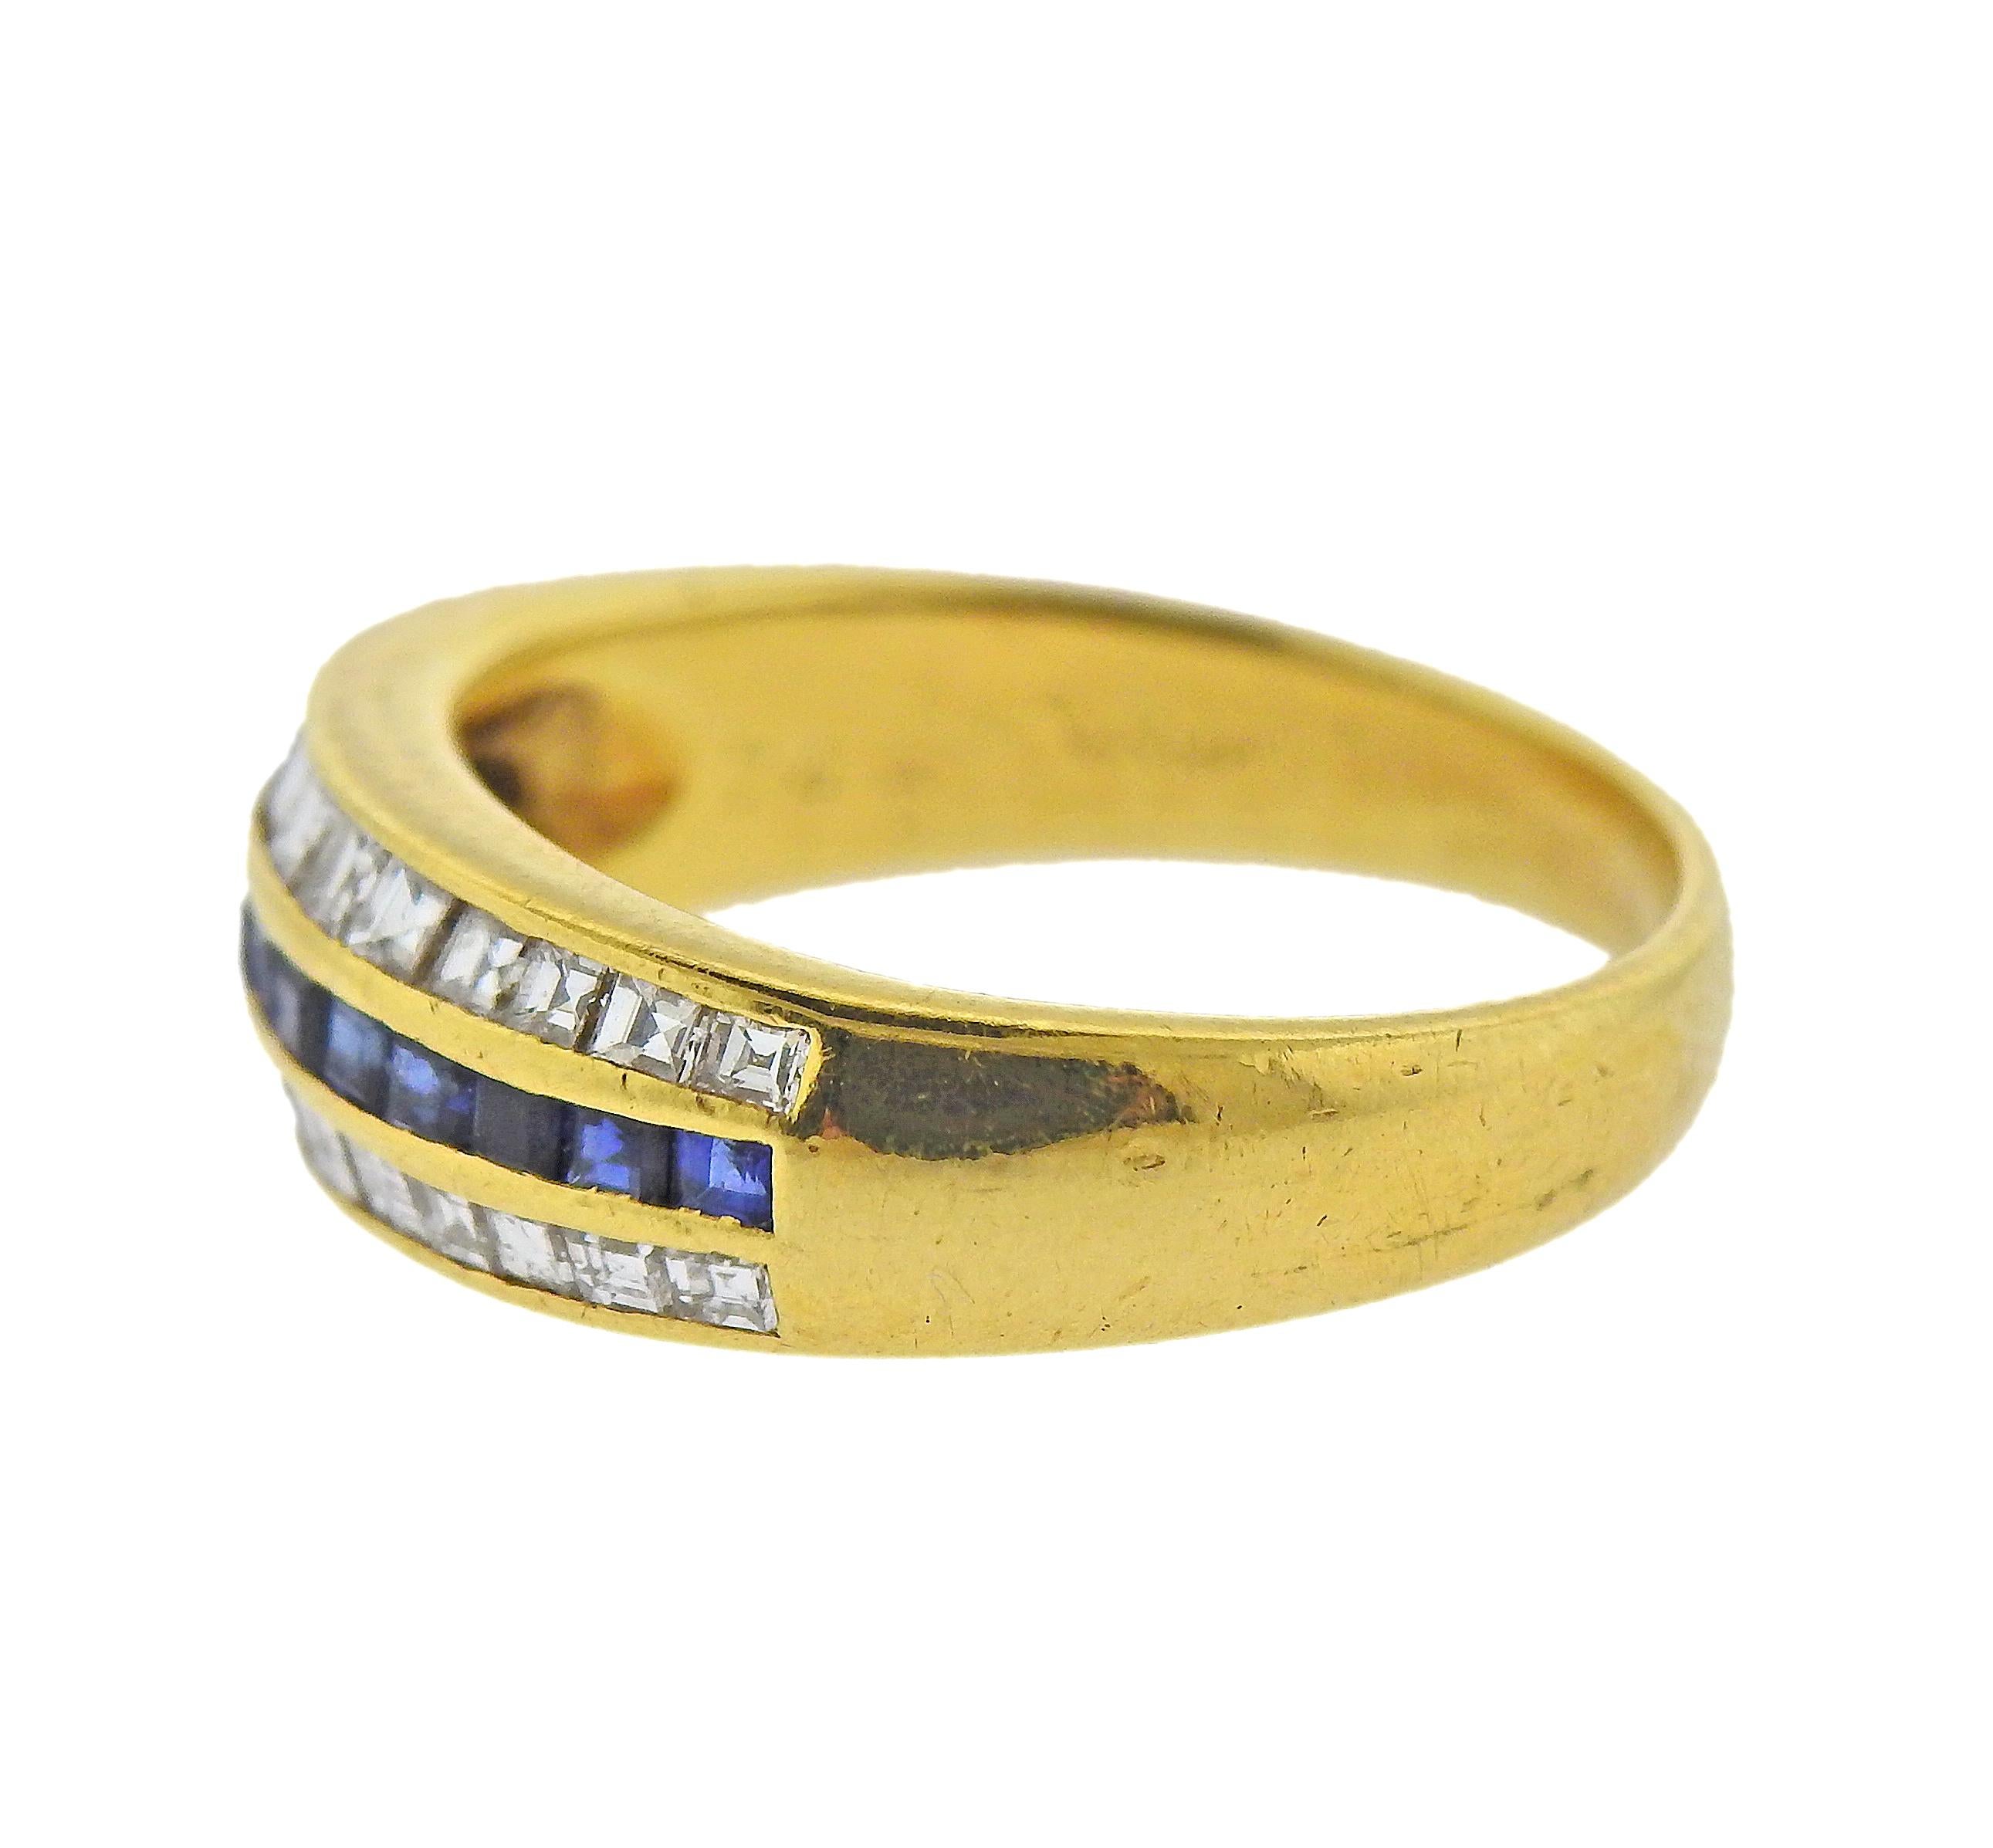 Delicate 18k yellow gold Cartier ring, with blue sapphires and approx. 0.60ctw in diamonds. Ring size - 5.5, ring top is 6mm wide. Marked: Cartier, 18k, 09-08 (scratched number), 746. Weight - 4.4 grams. 